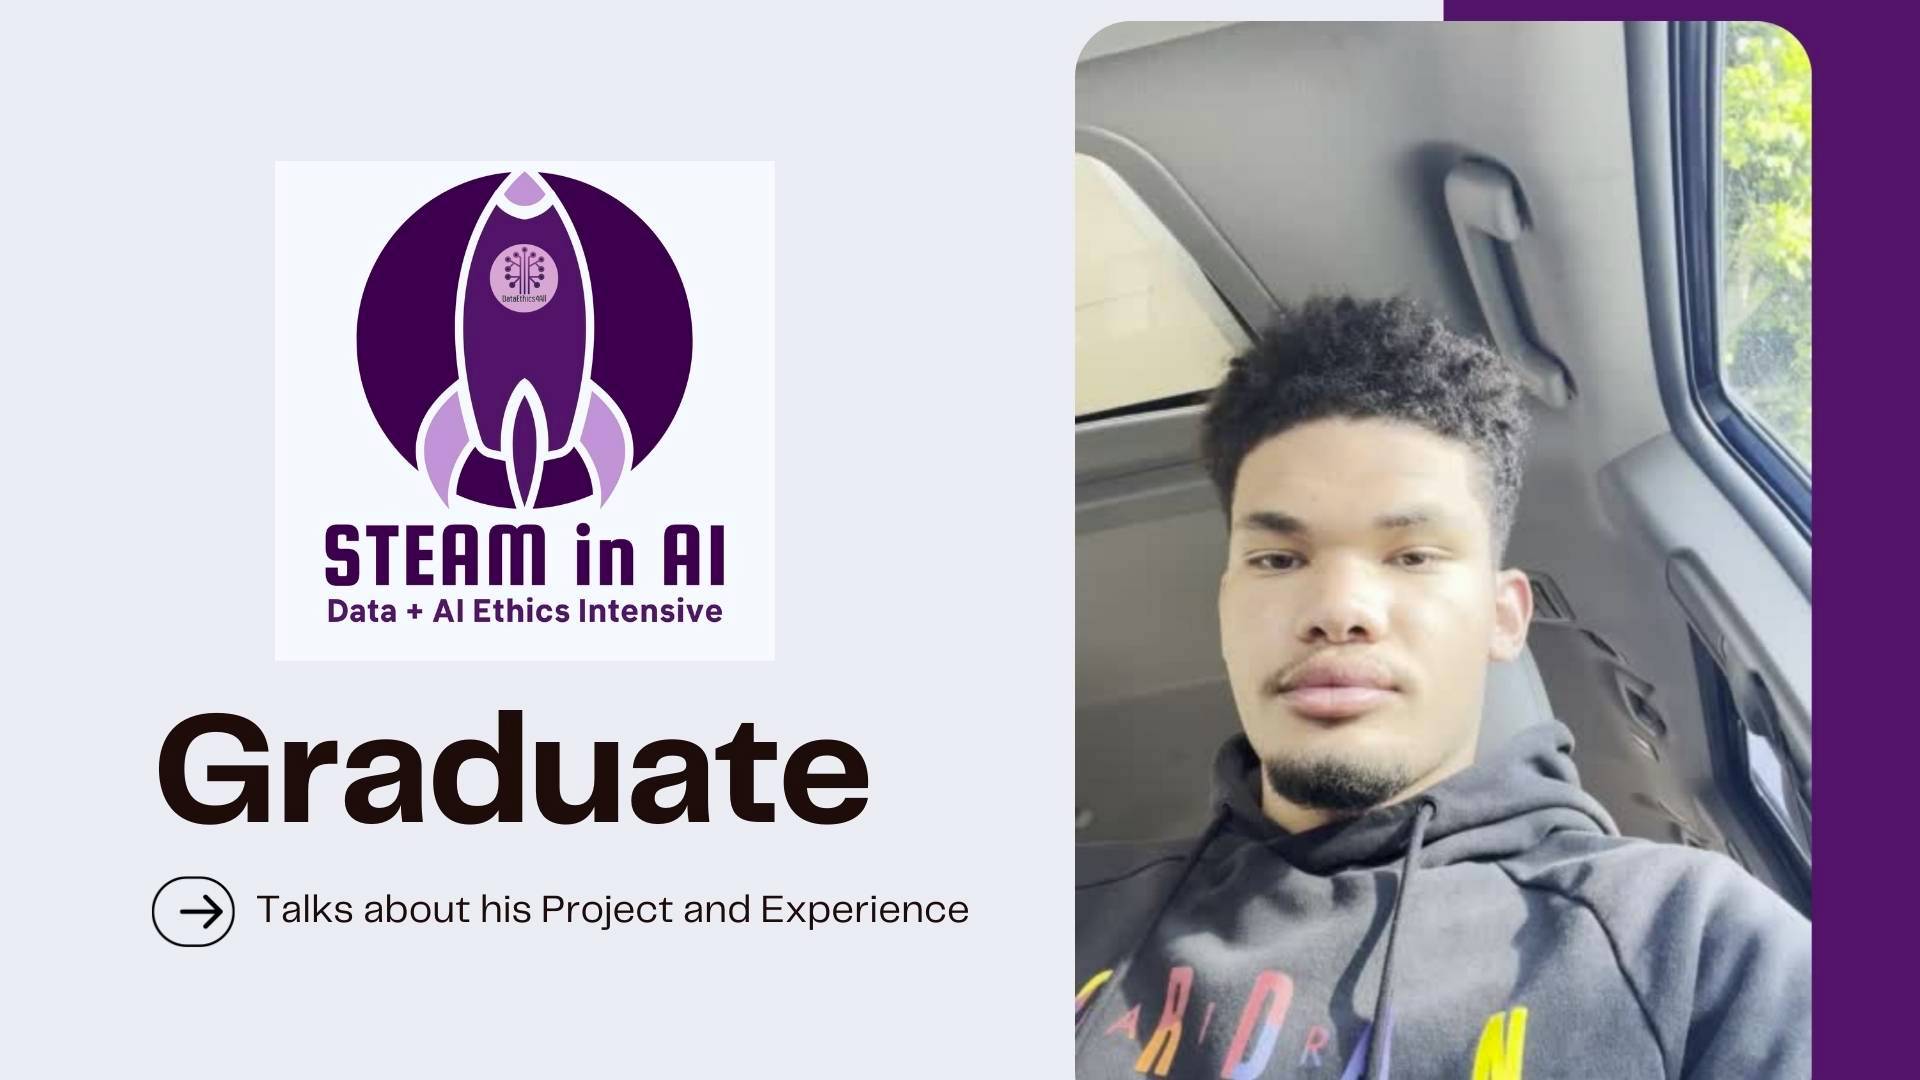 Harvey Mudd Engineering Incoming Freshman Marcell Gentles talks about his STEAM in AI experience